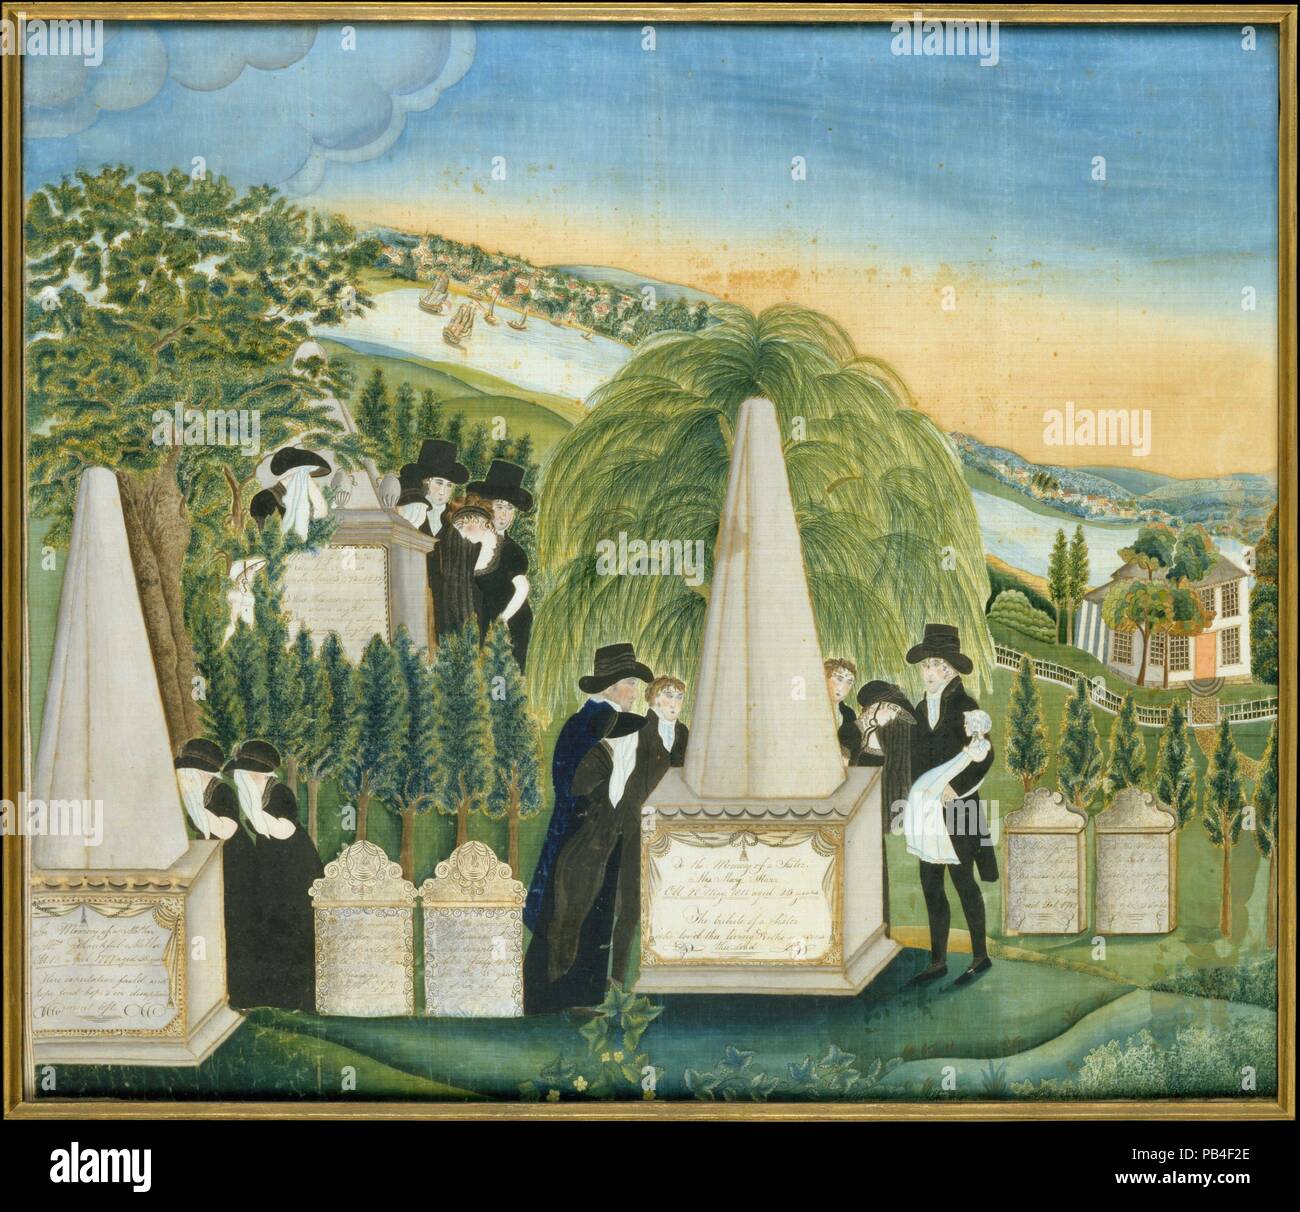 Memorial painting. Culture: American. Dimensions: 28 x 32 3/8 in. (71.1 x  82.2 cm). Maker: Sally Miller. Date: 1811. The Litchfield Female Academy  (1792-1833), where this picture was made, was one of